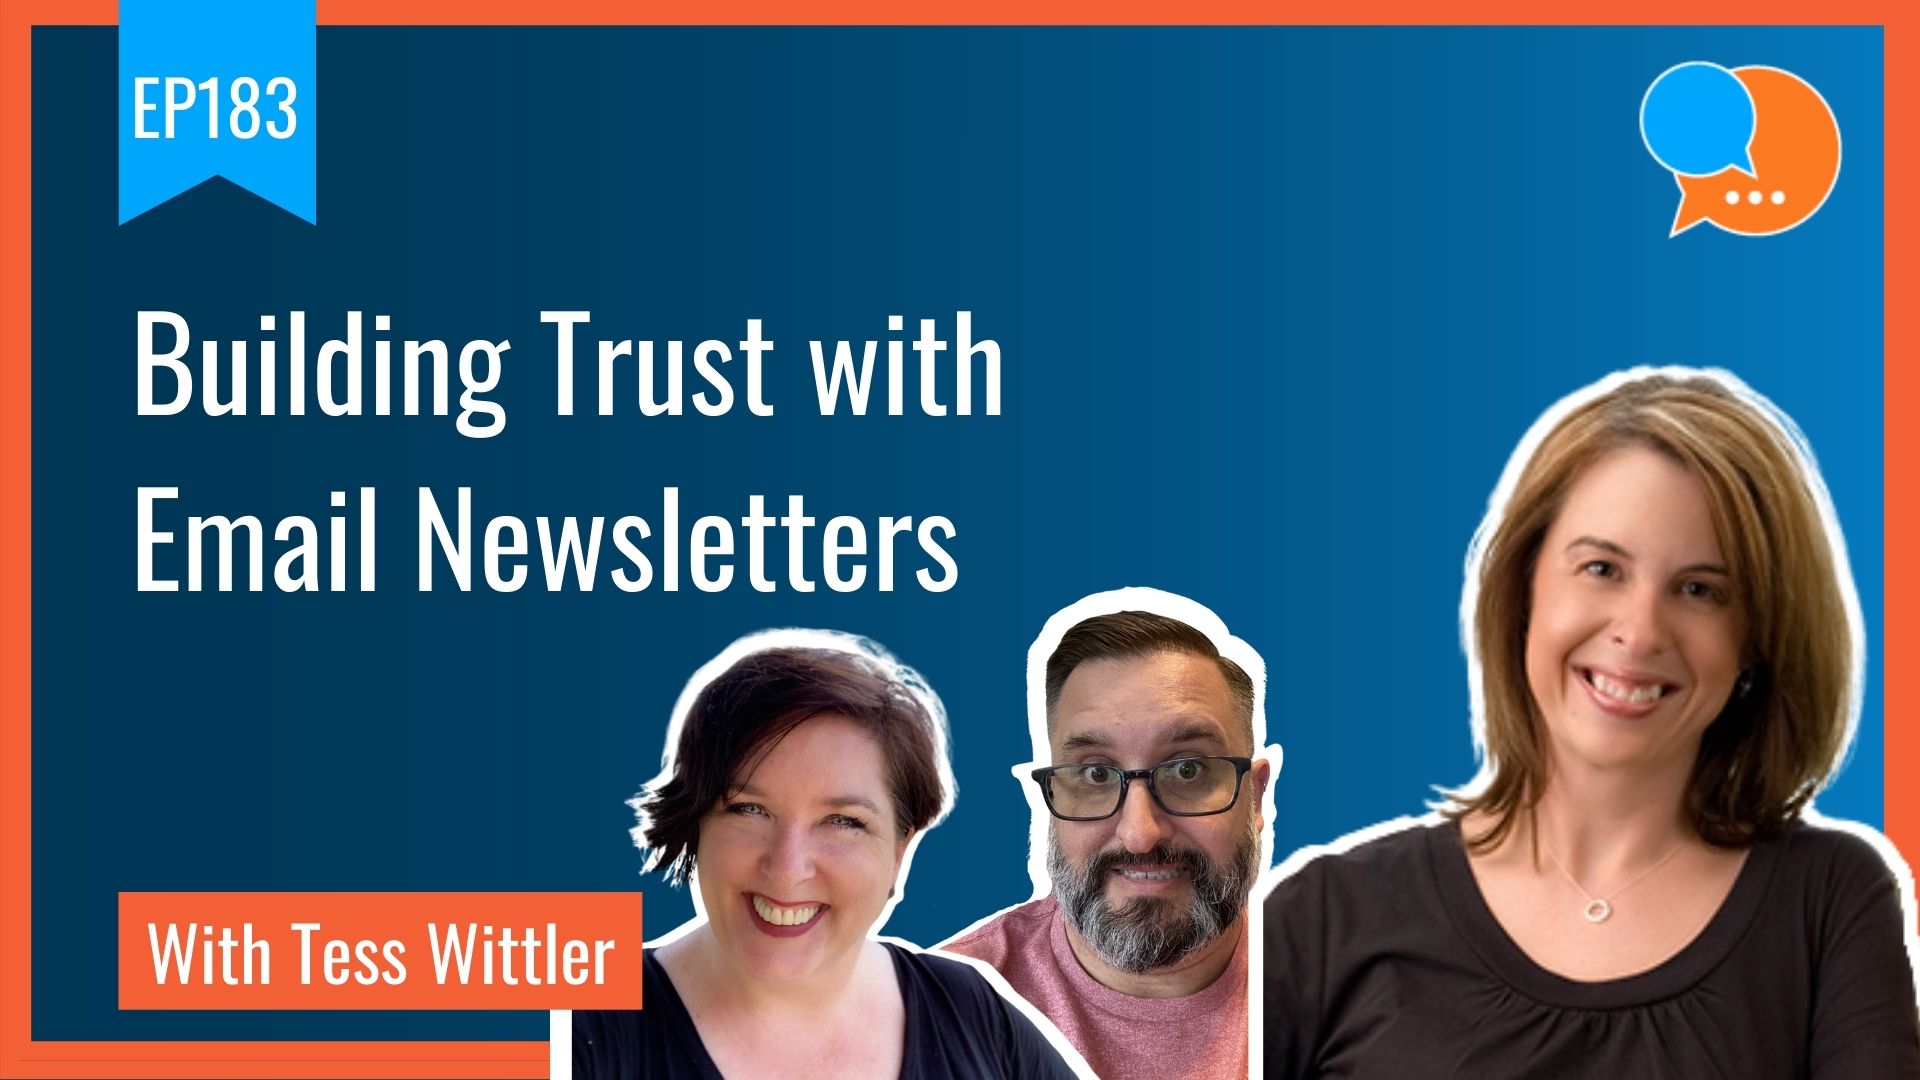 EP183 Building Trust with Email Newsletters Smart Marketing Show